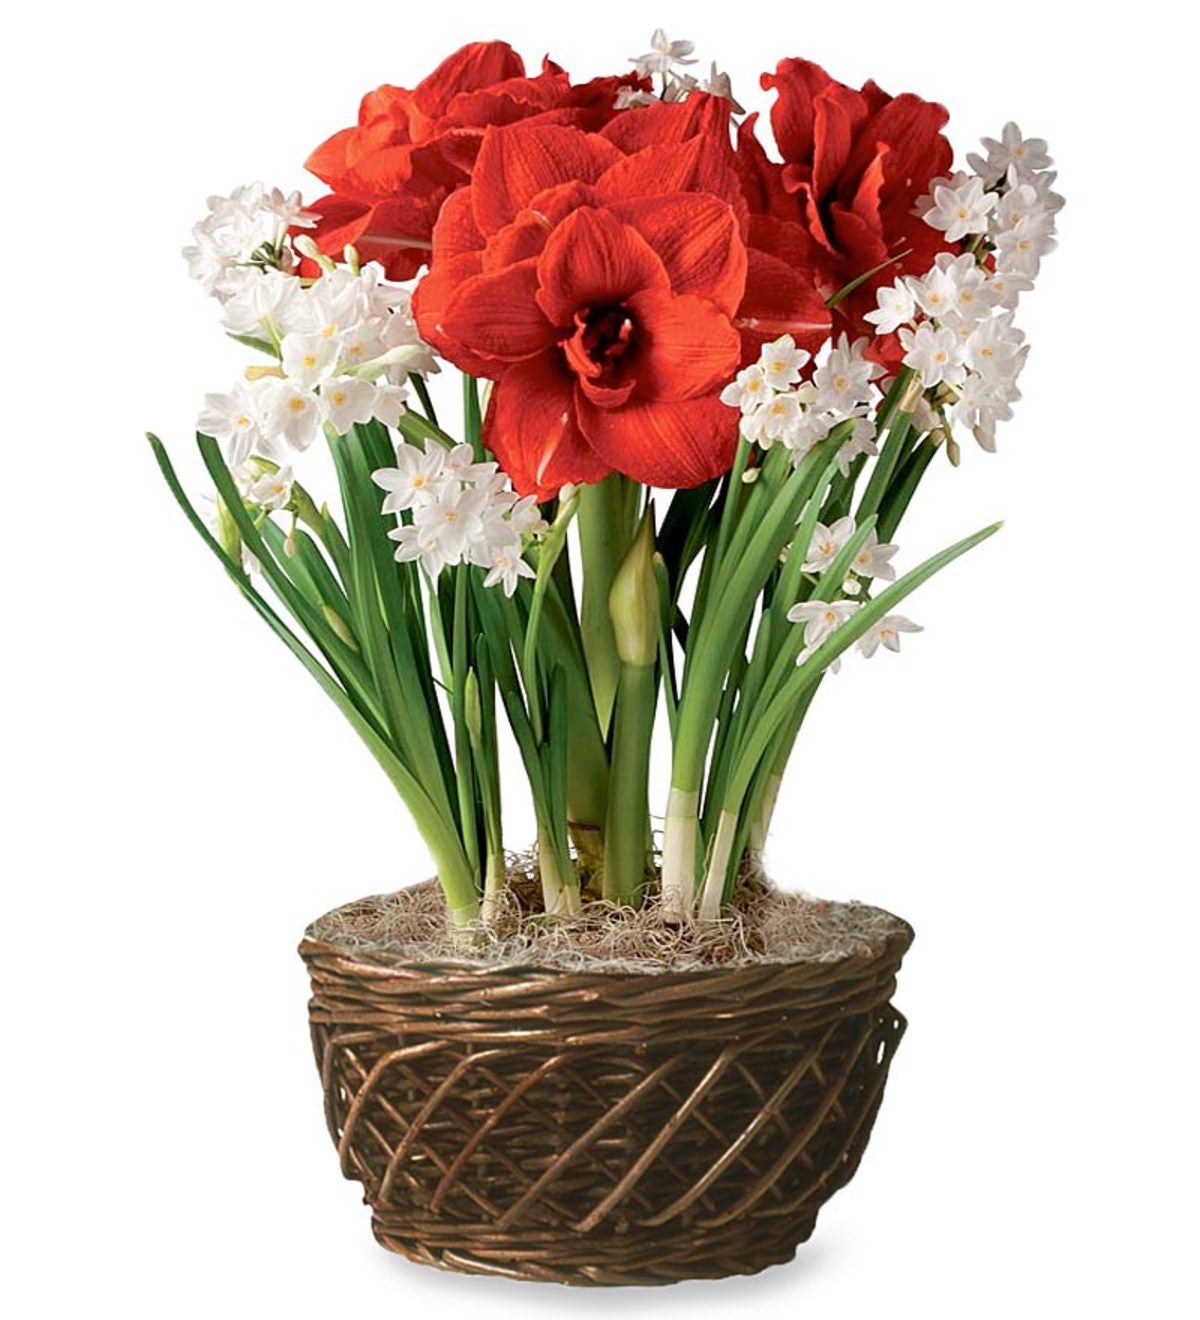 Bulb Garden With Amaryllis and Narcissus